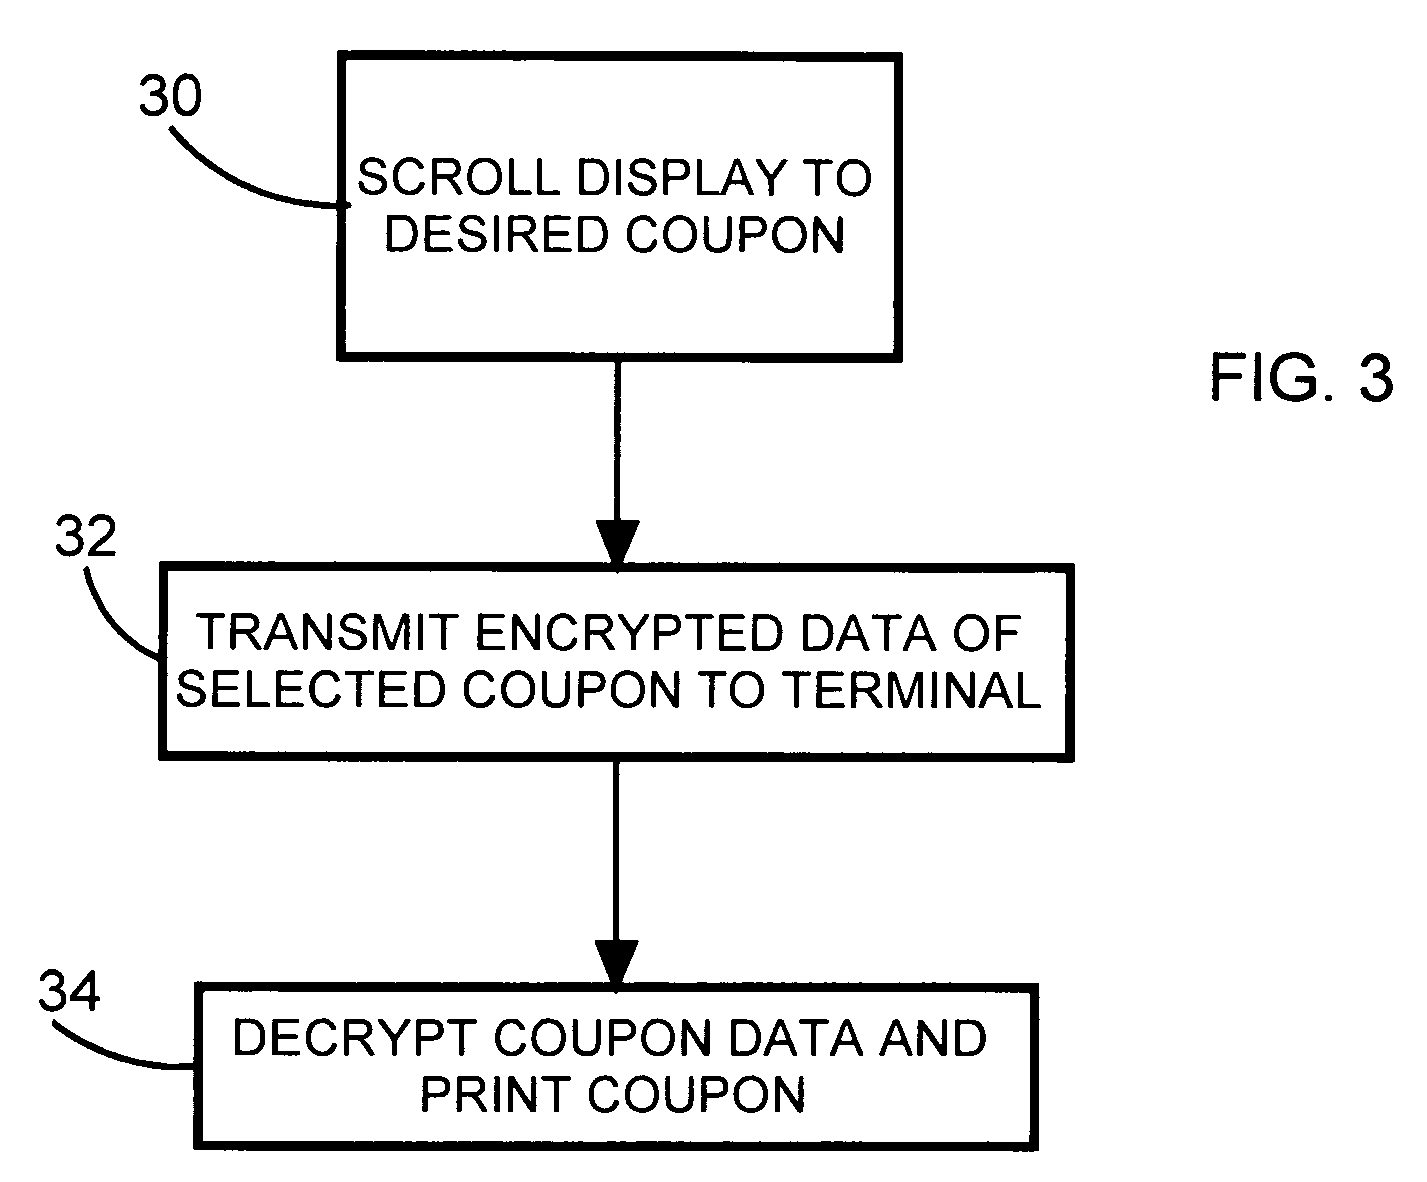 Technique for eliminating fraudulent use of printed coupons